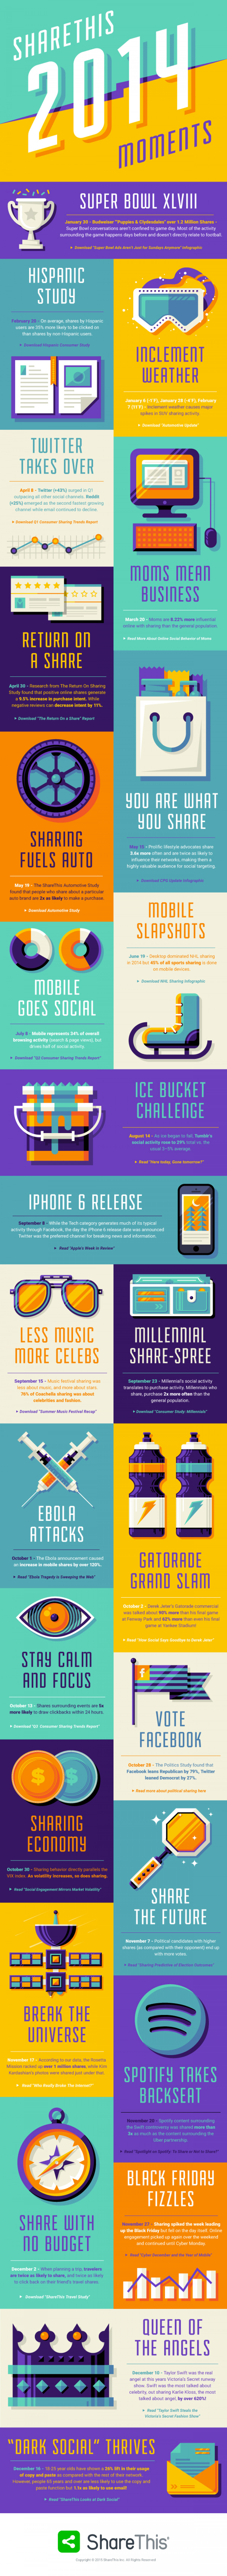 2015 Sharing Review Infographic